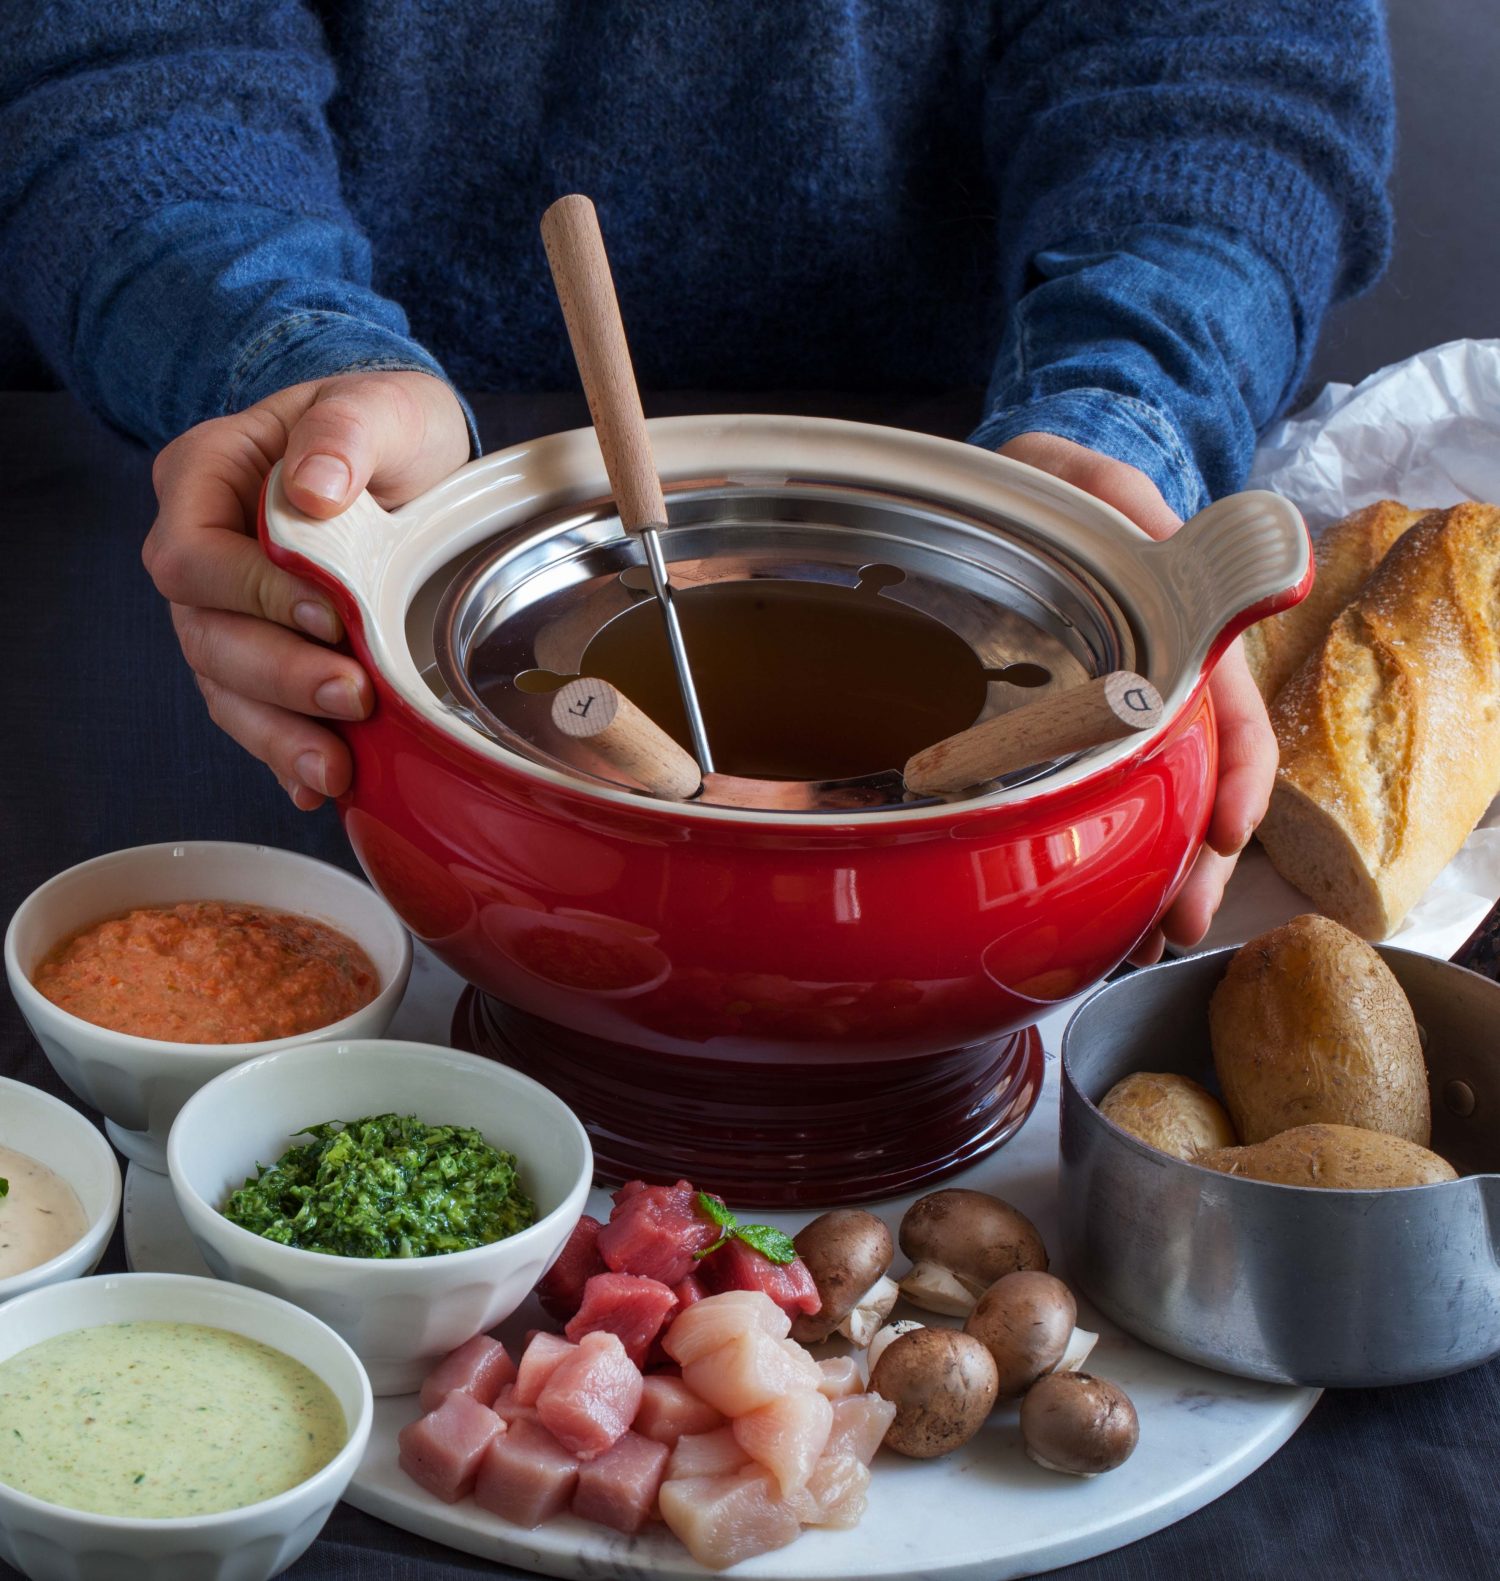 Meat Fondue or Hot Pot for Christmas?